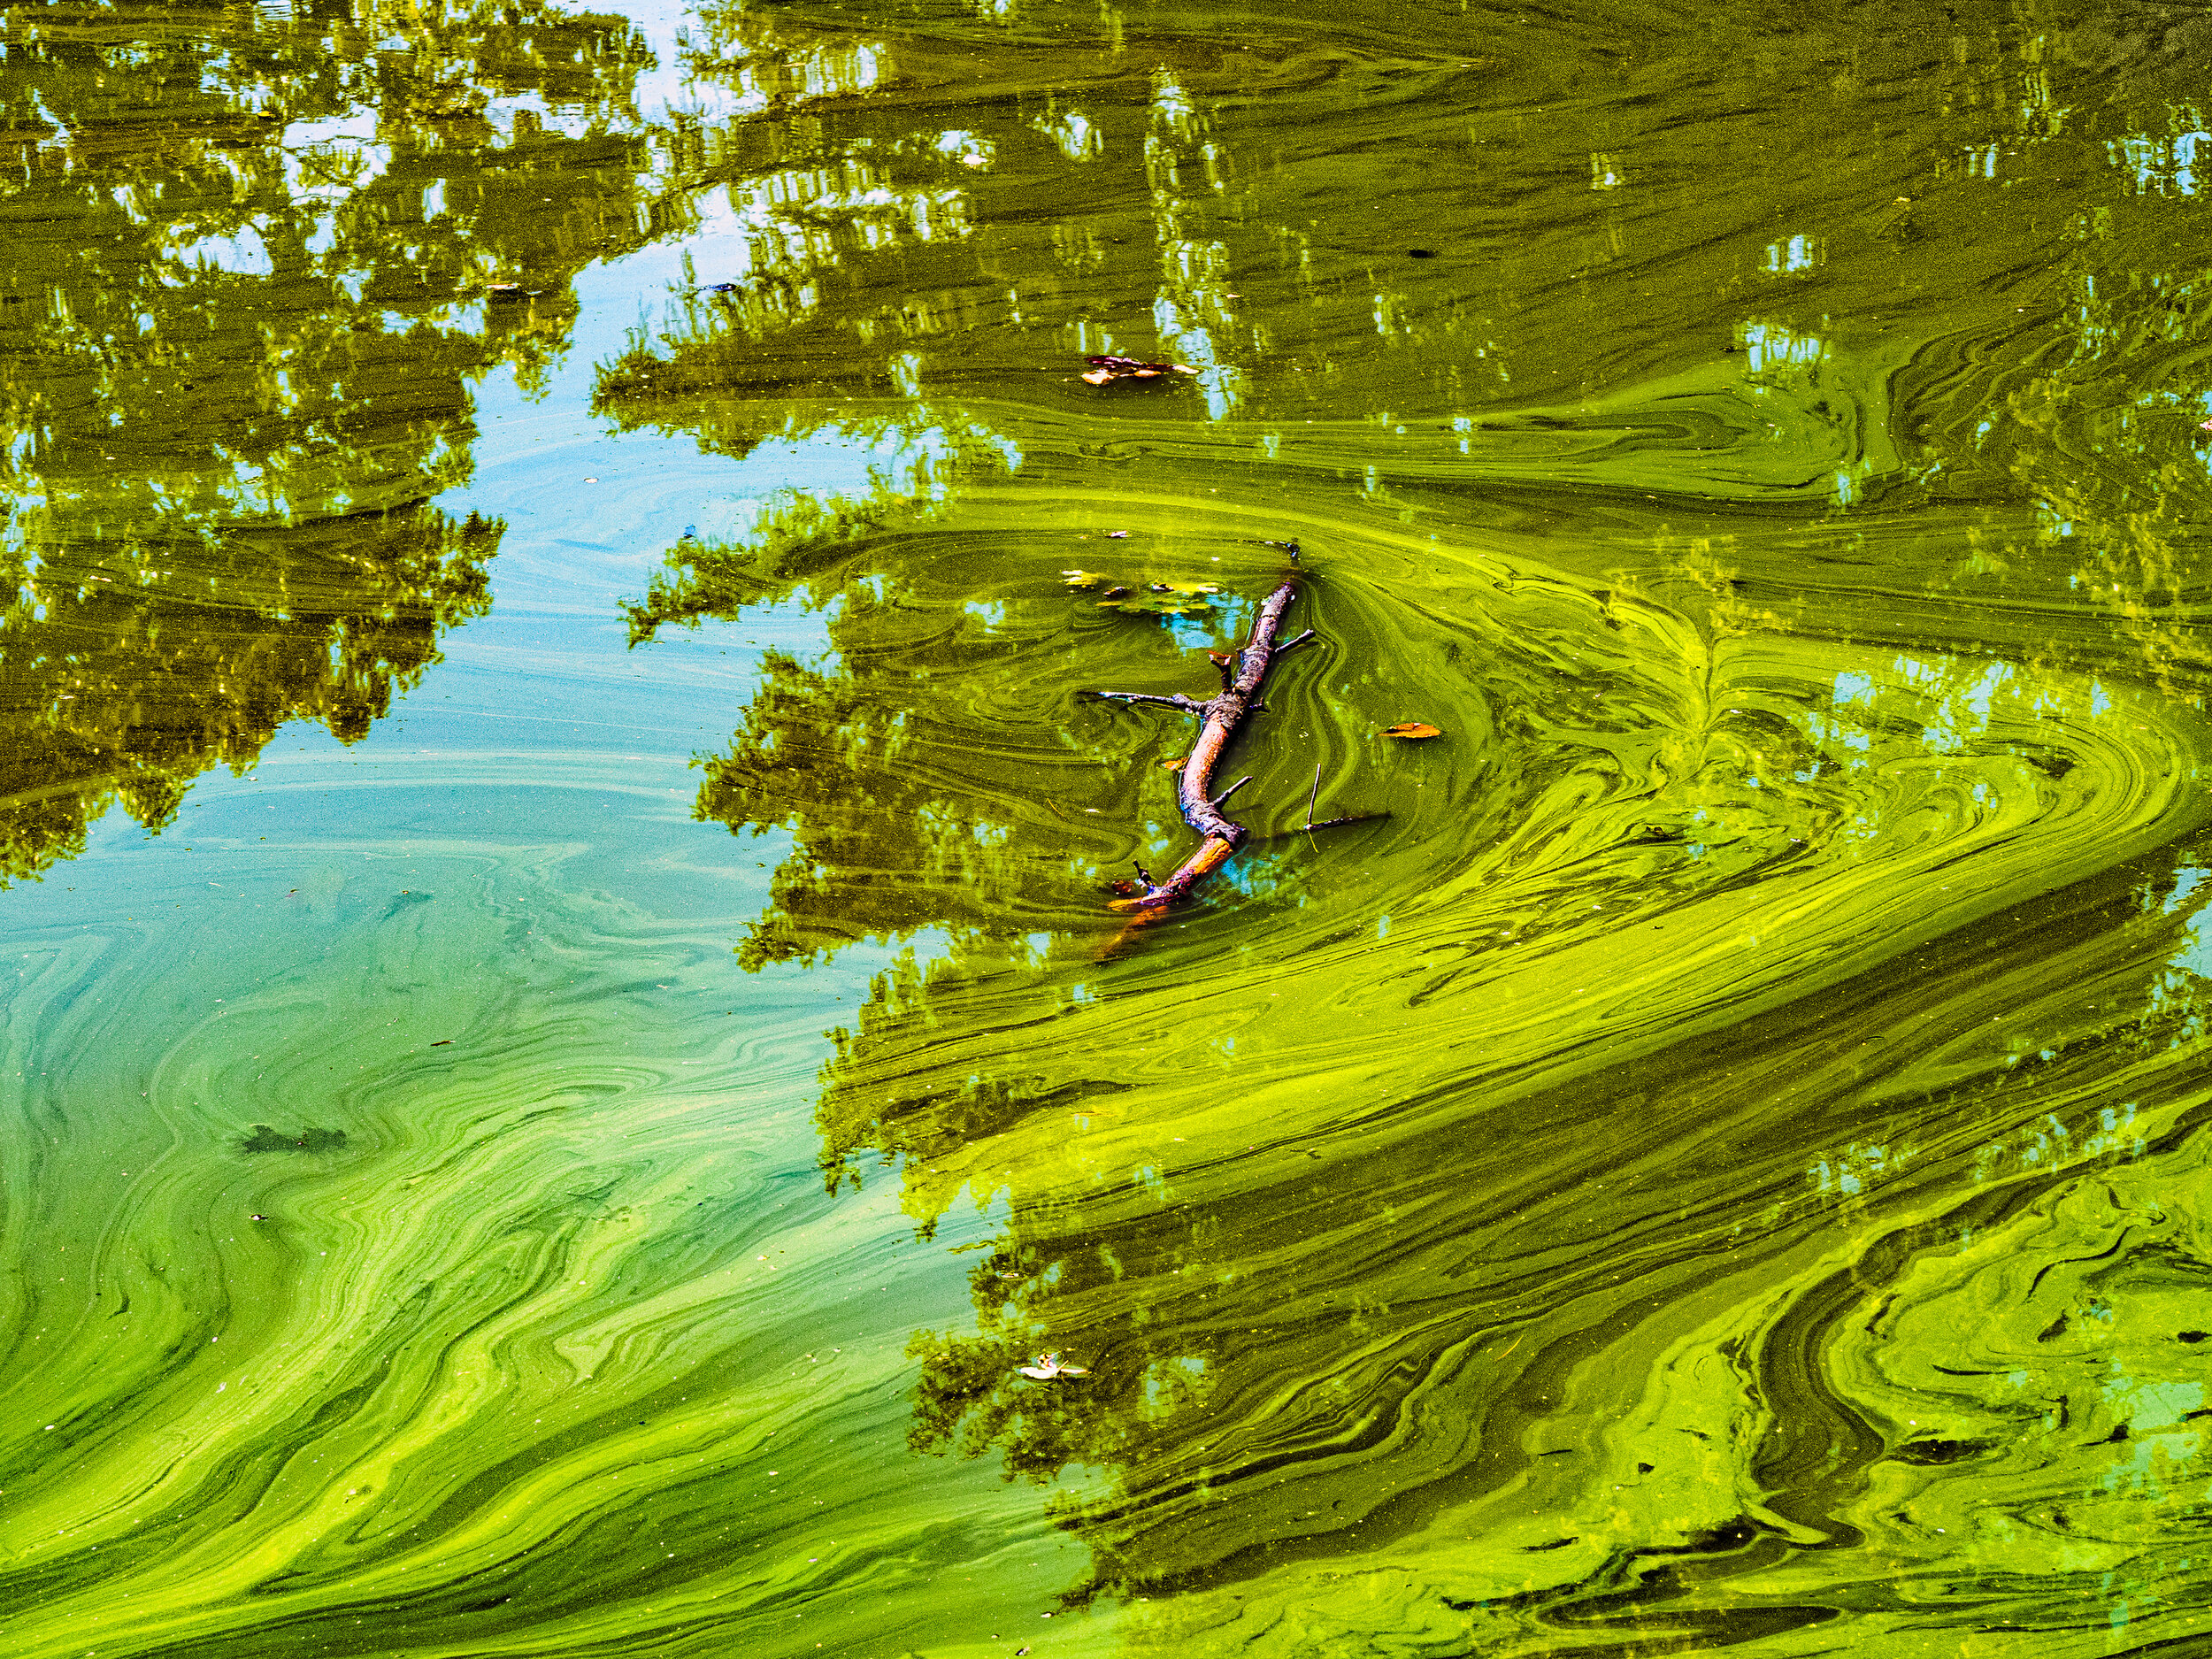 Patterns in Polluted Water #2